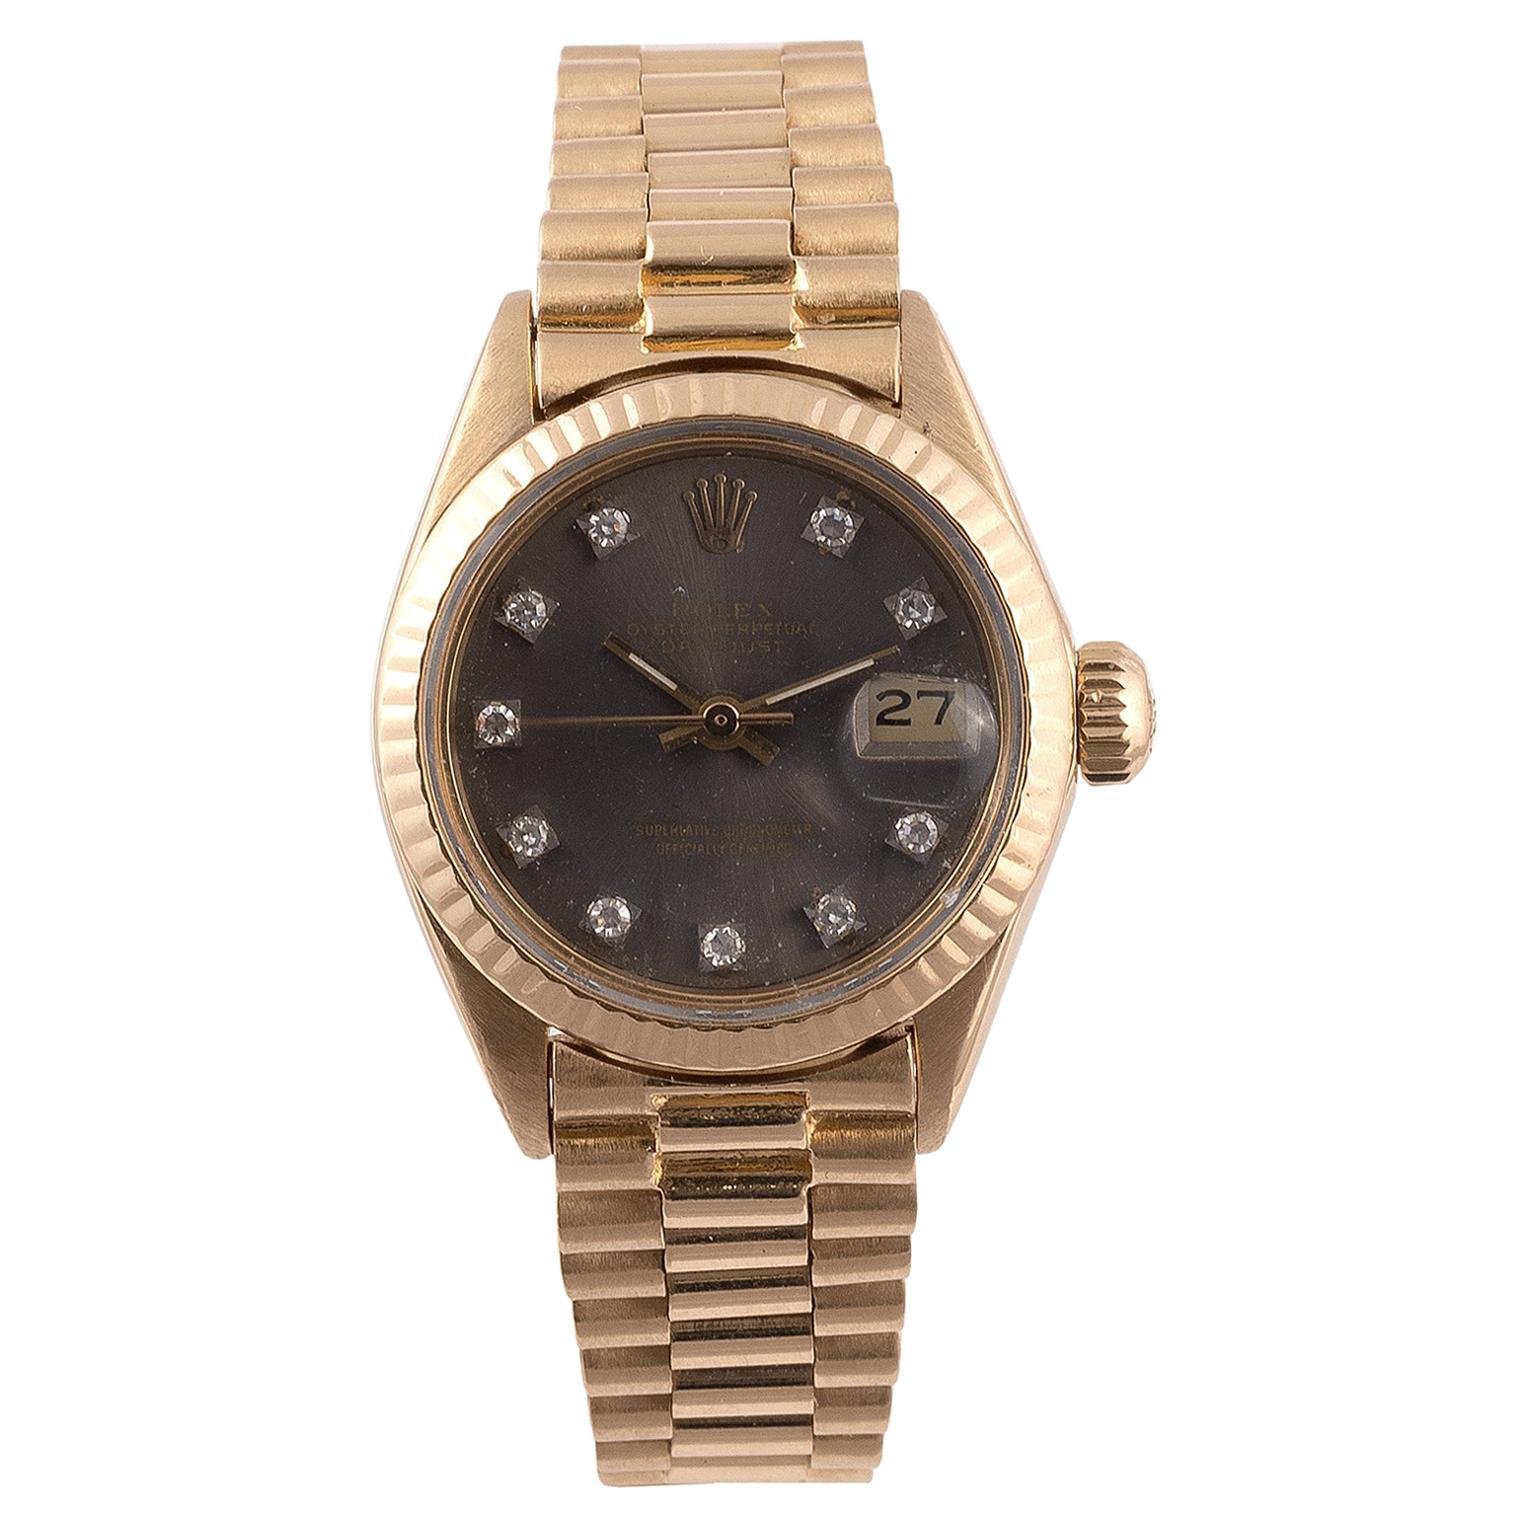 Rolex Ref. 6917, Lady's Datejust Gold and Diamonds